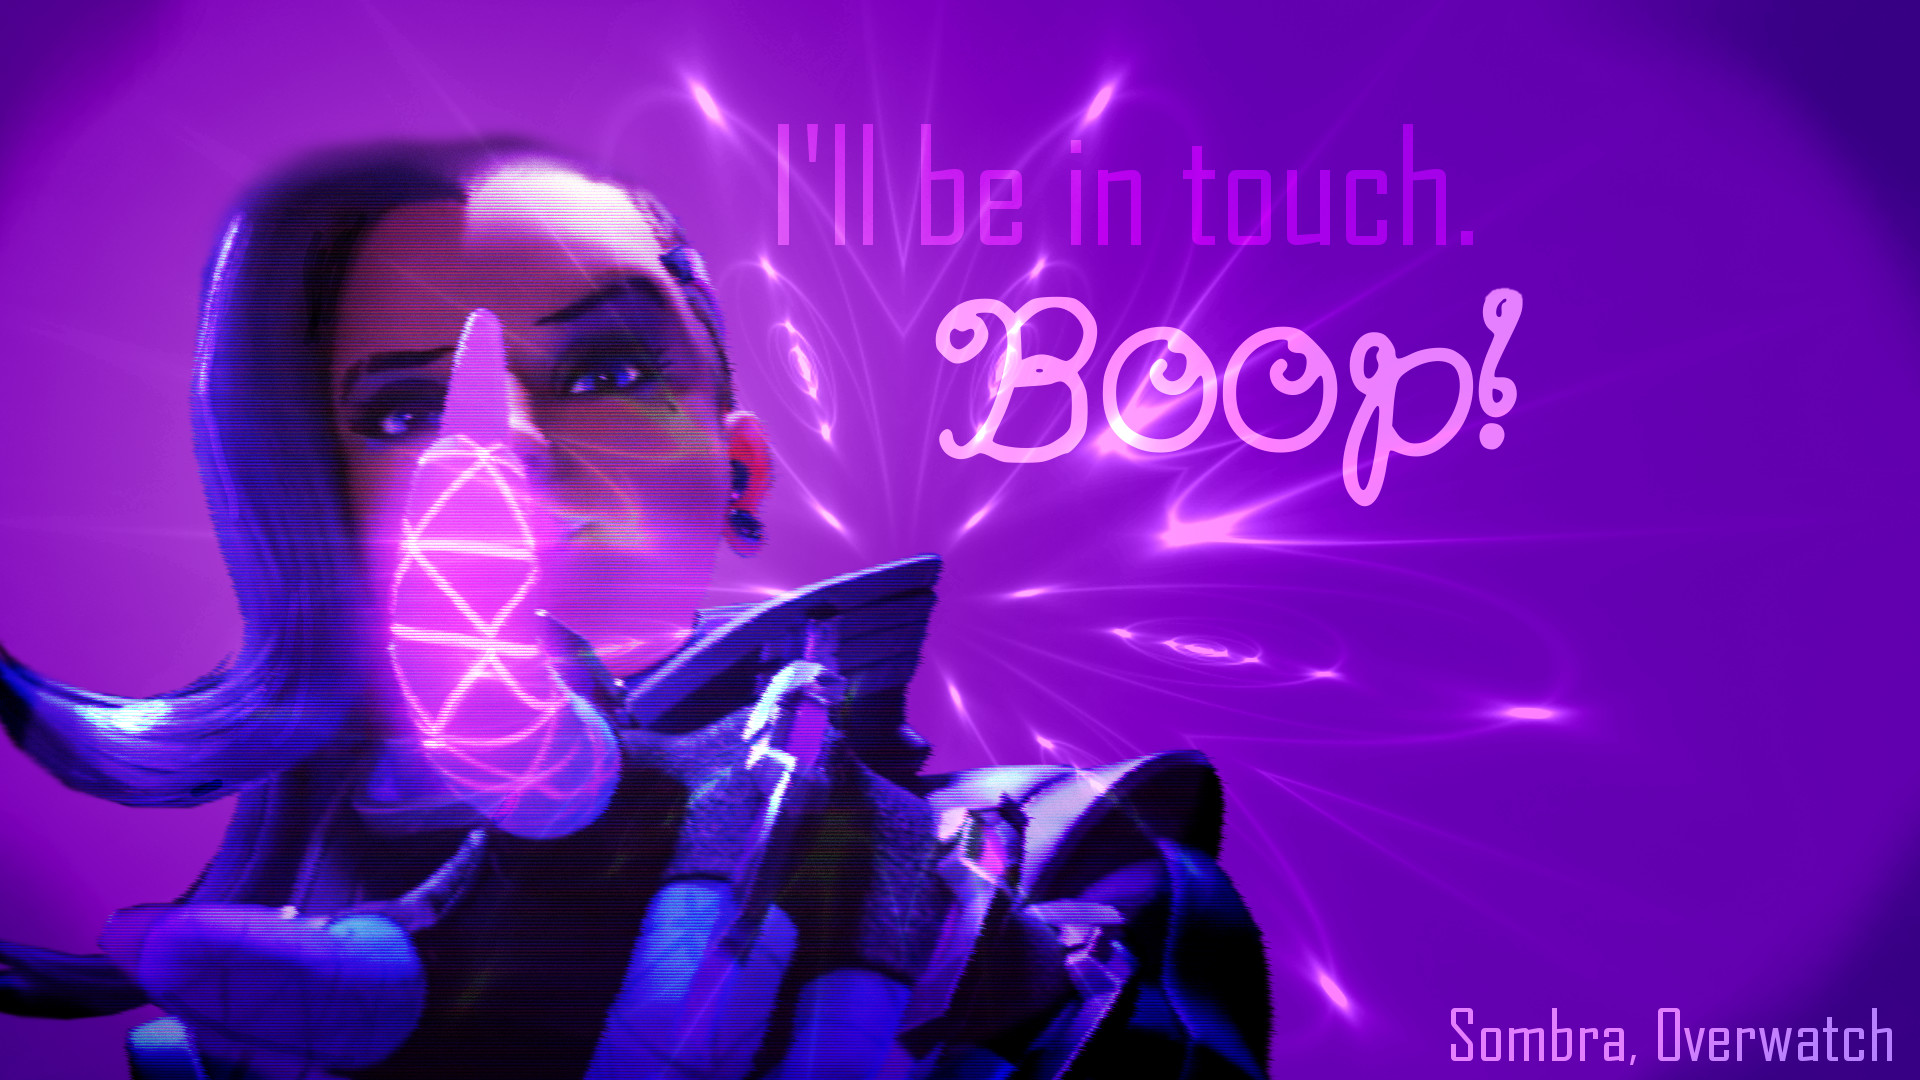 1920x1080 Sombra PC BG 1920 x 1080 Downloadable by Brutalight-Sparcake